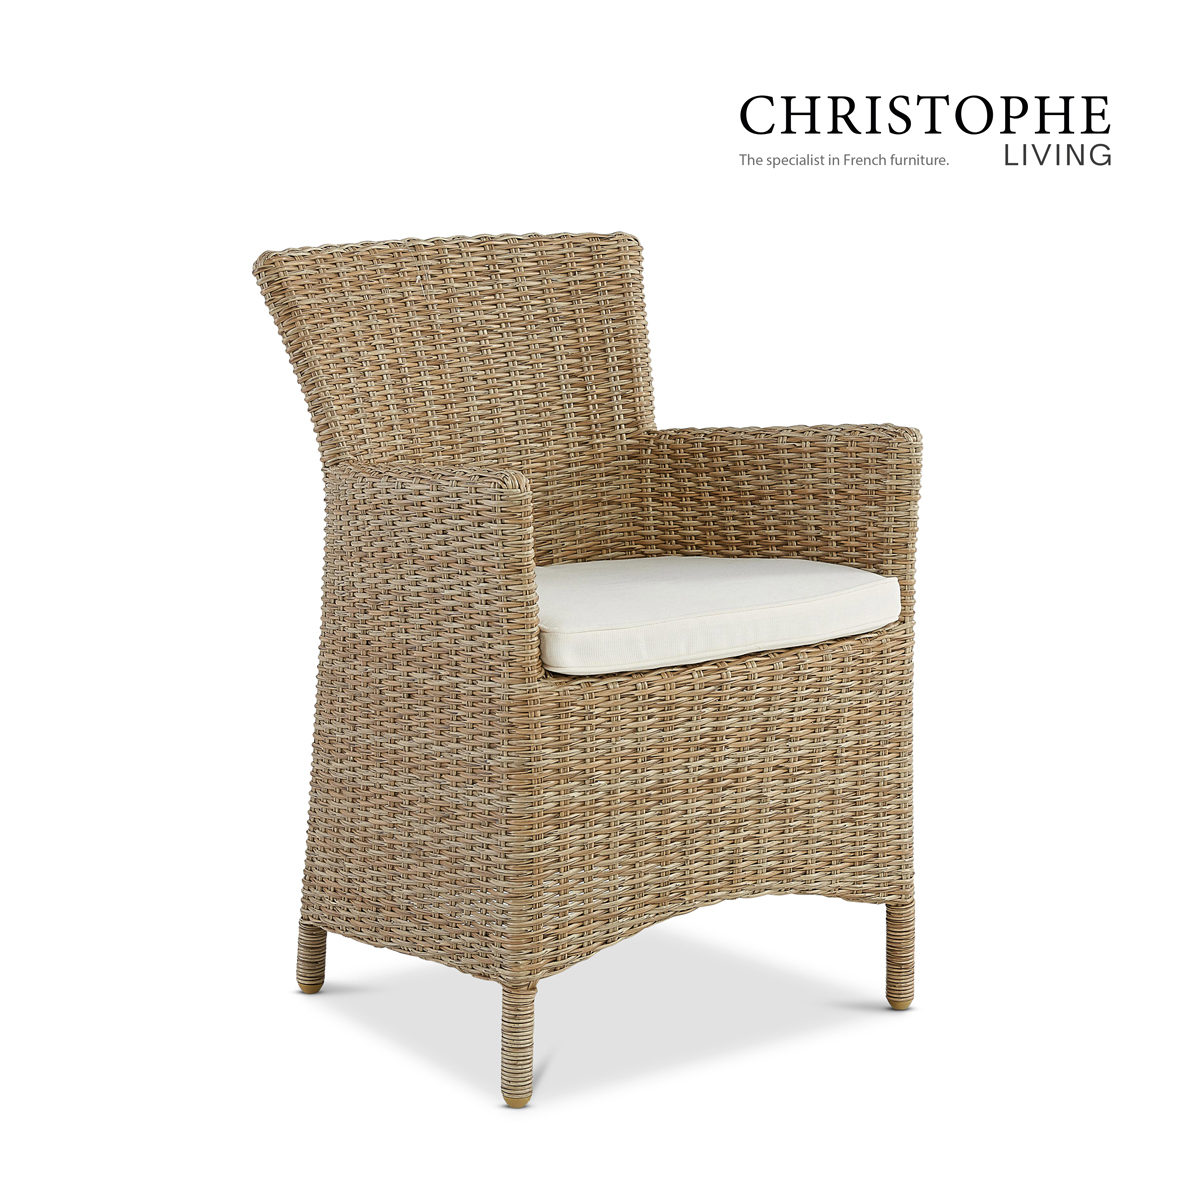 Four Mile Classic Outdoor Dining Chair in Natural Synthetic Rattan and Wicker weave